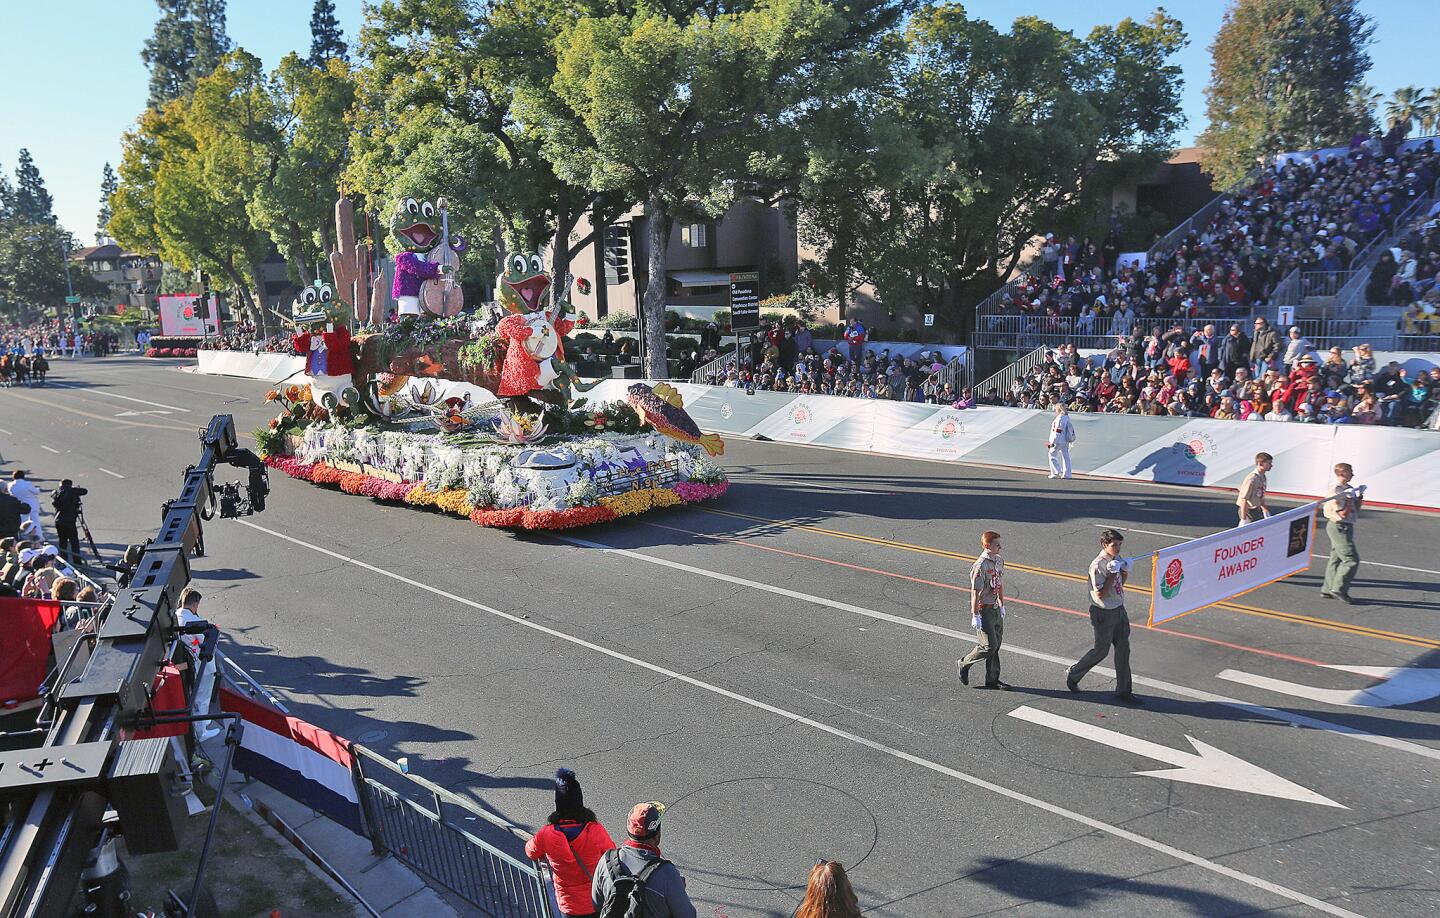 Photo Gallery: The 2019 Rose Parade